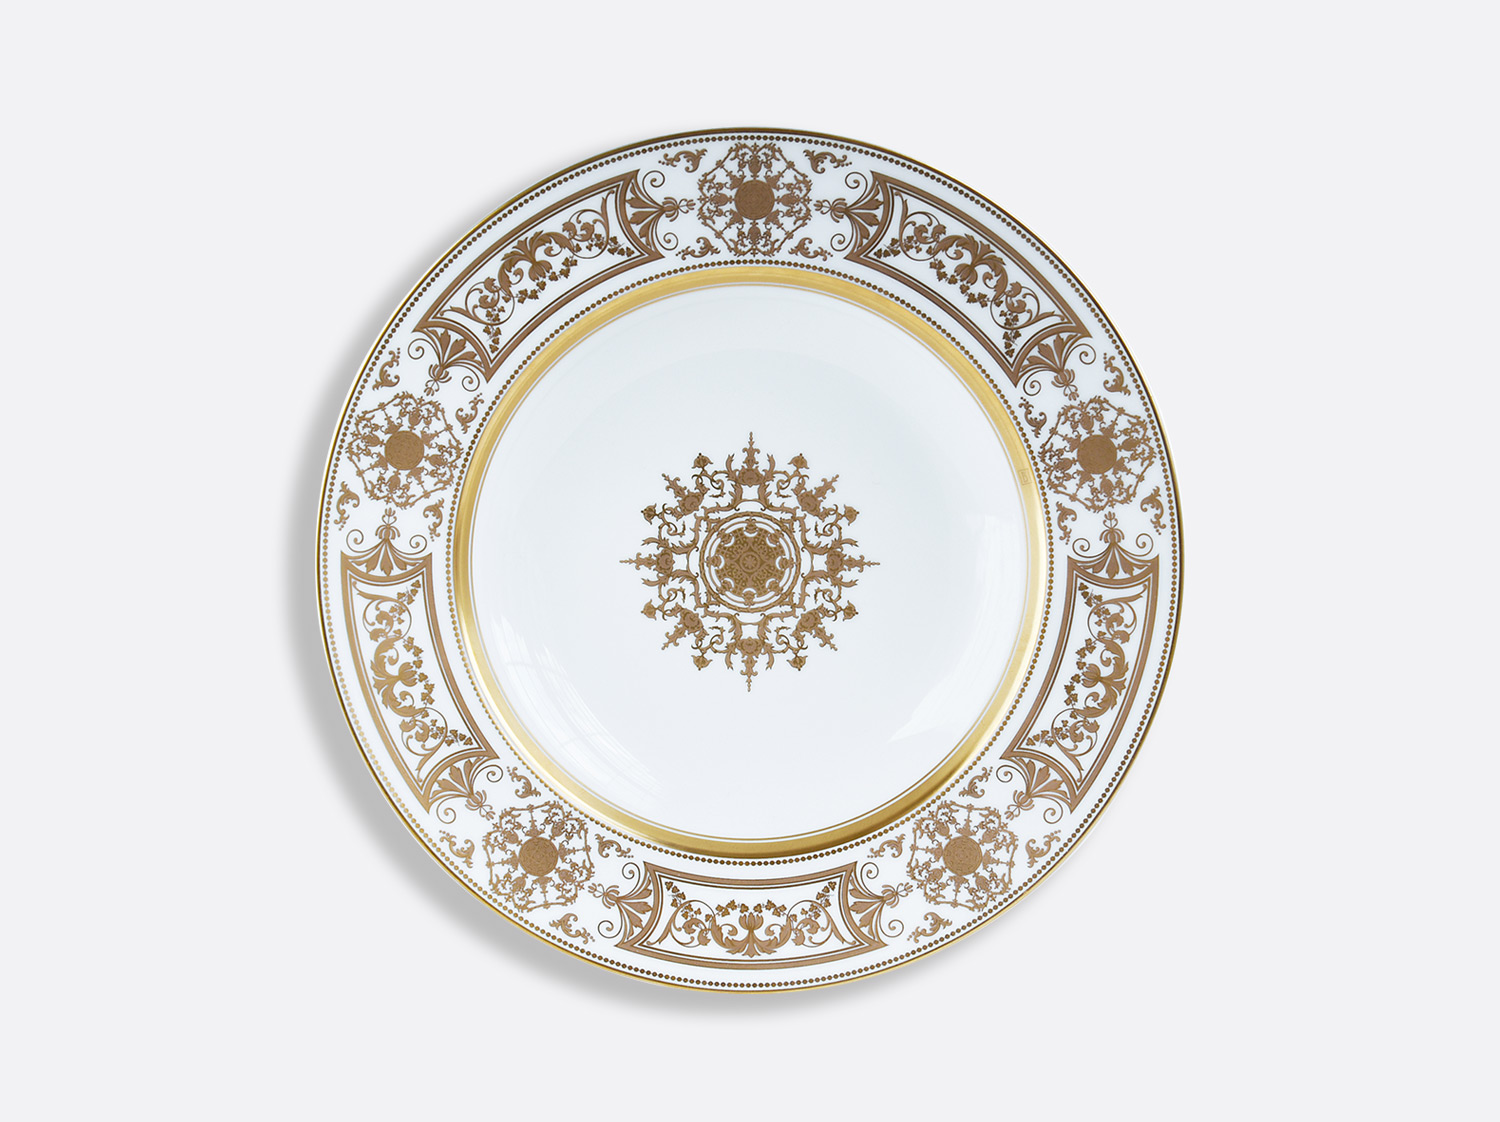 China Rim soup 9'' of the collection Aux Rois Or | Bernardaud